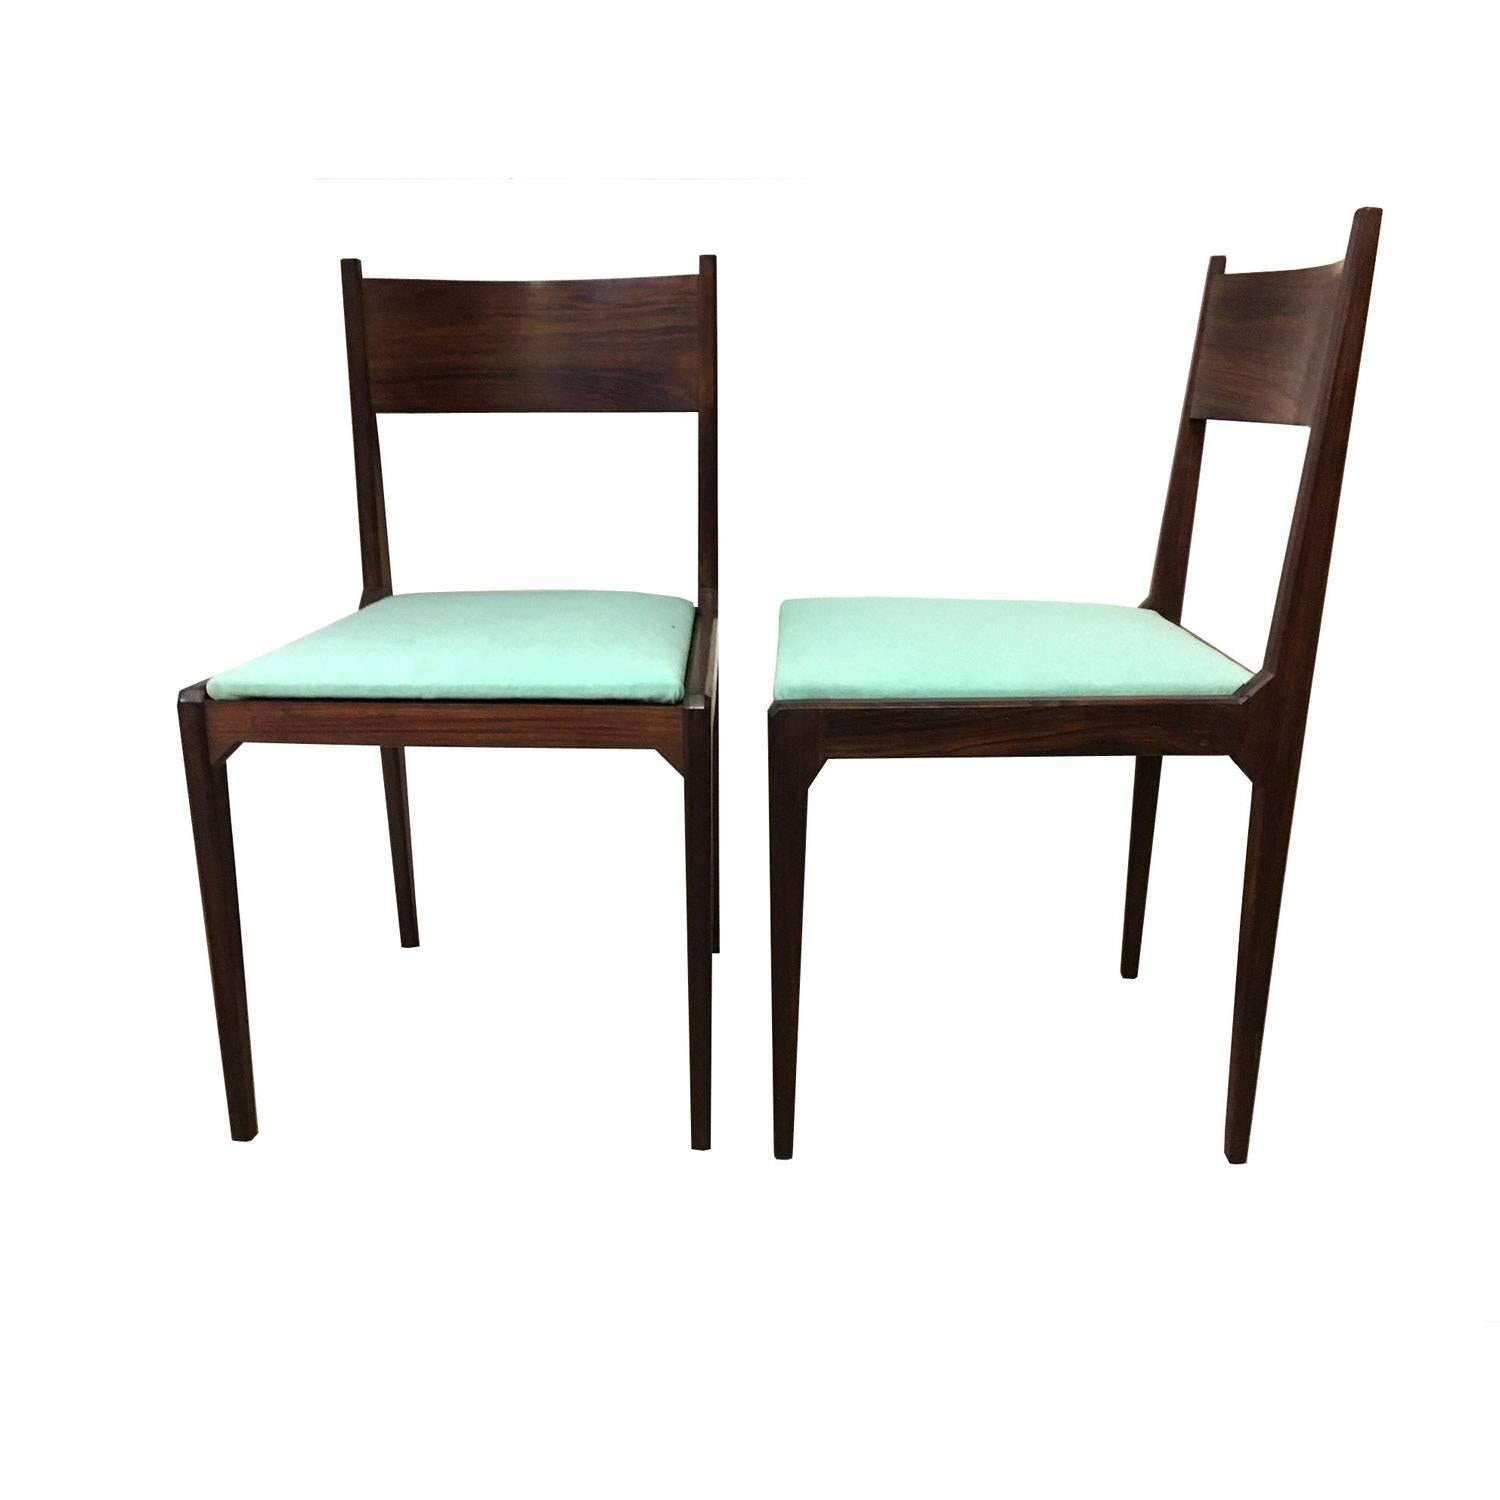 Set of four rosewood dining chairs with green fustian seat.Design by Gio Ponti and Alberto Rosselli  (Studio Ponti-Fornaroli-Rosselli), Italy c. 1959